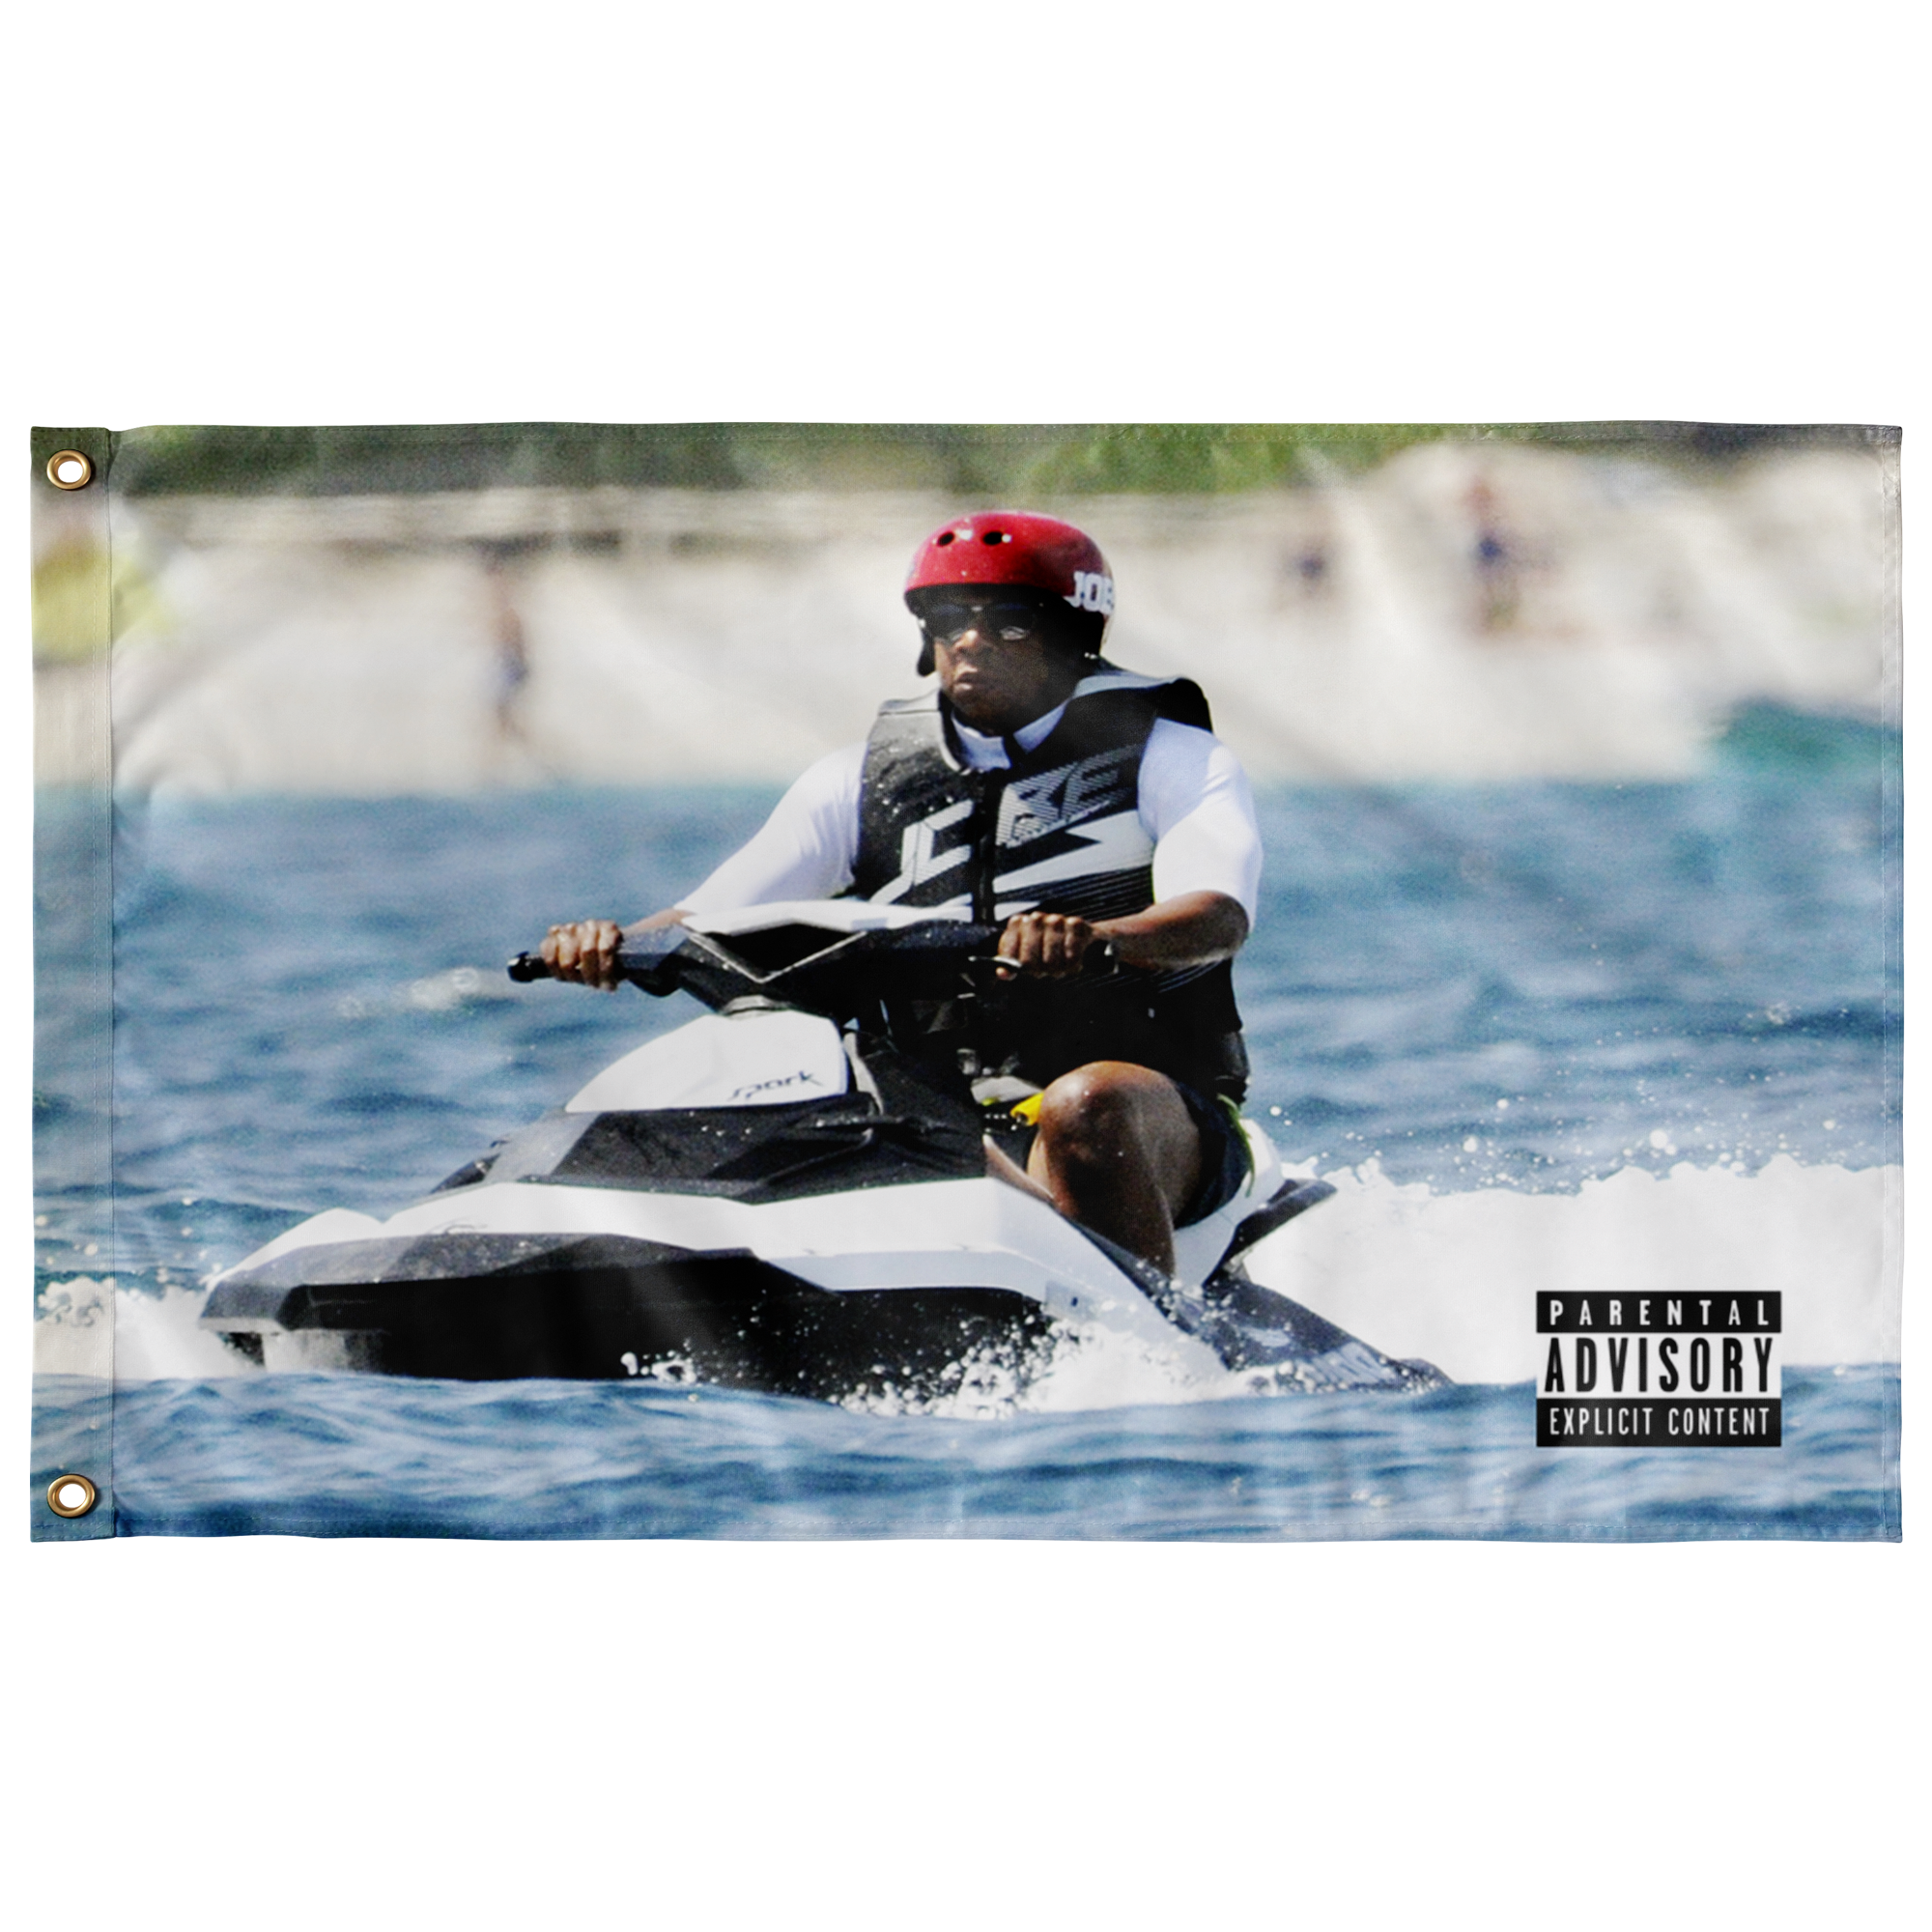 Jay Z Jetski flag – CollegeWallFlags - The College Dorm Room Flags In The Game